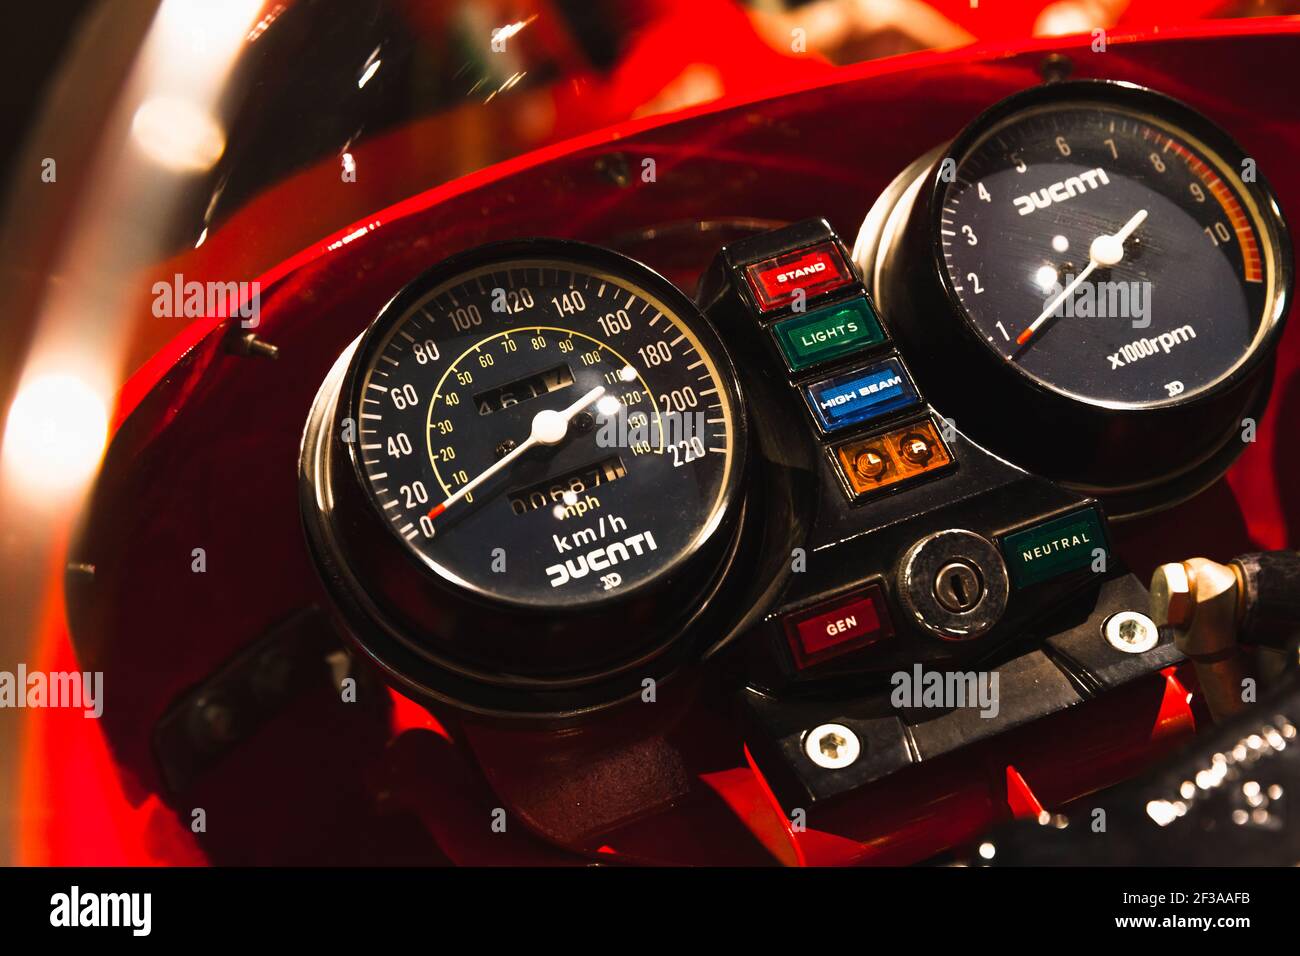 St.Petersburg, Russia - April 9, 2016: Ducati sport bike dashboard with analog speedometer, tachometer, odometer and buttons Stock Photo